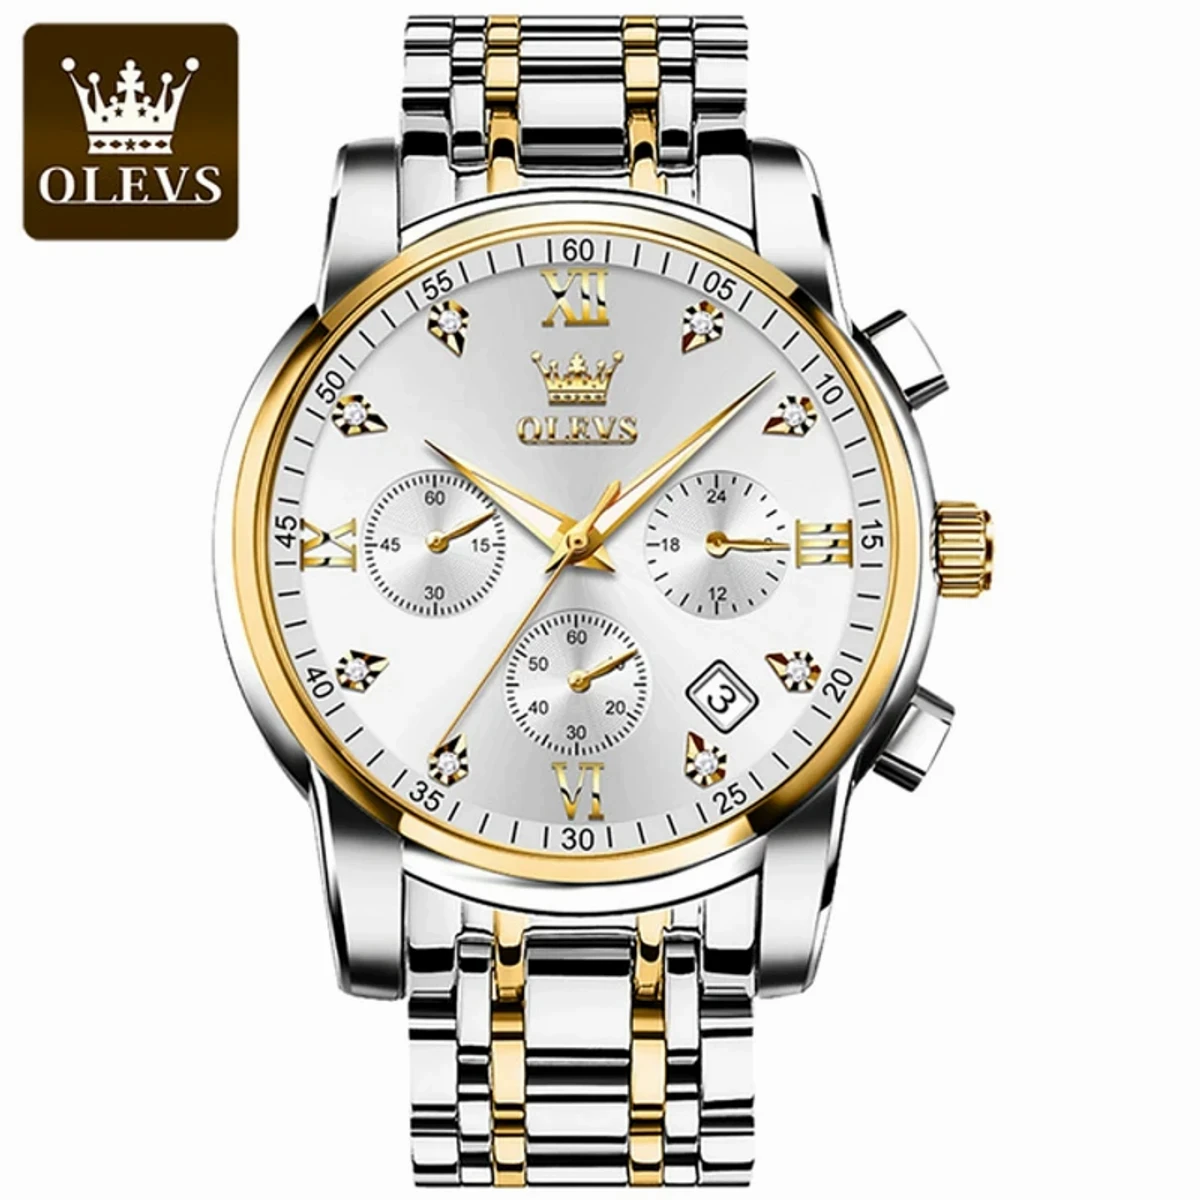 OLEVS MODEL Watch for Men Stainless Steel Watches  TOTON AR DIAL WHITE COOLER WATCH - MAN WATCH